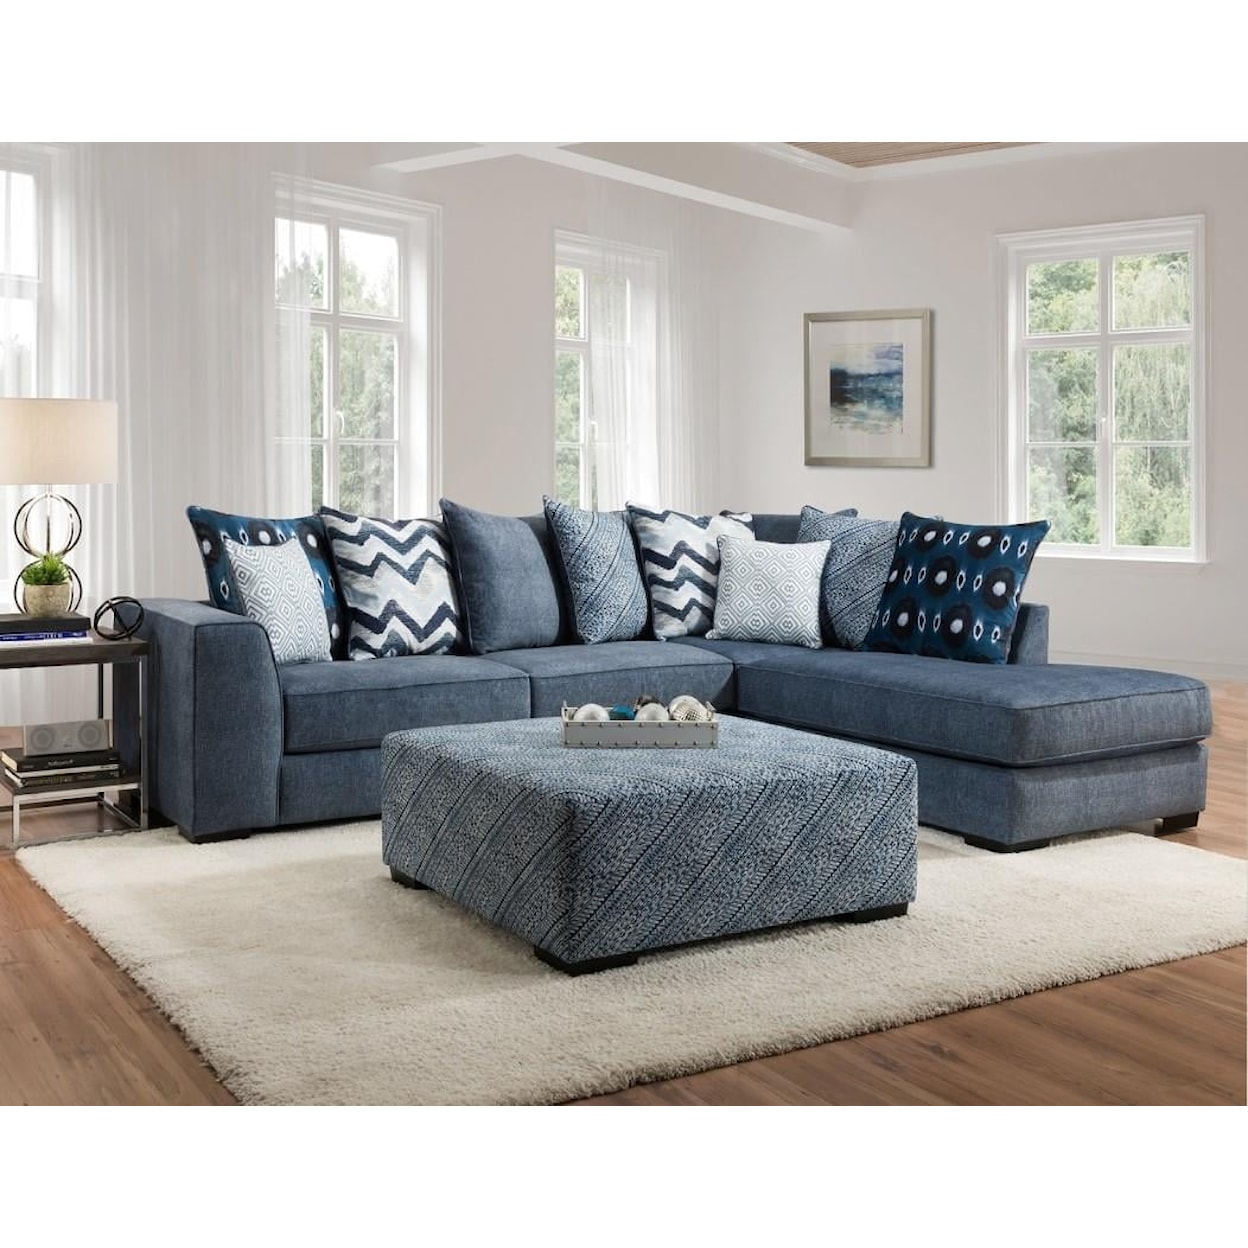 Albany 0342 TUSSAH BLUE 2-Piece Sectional Sofa